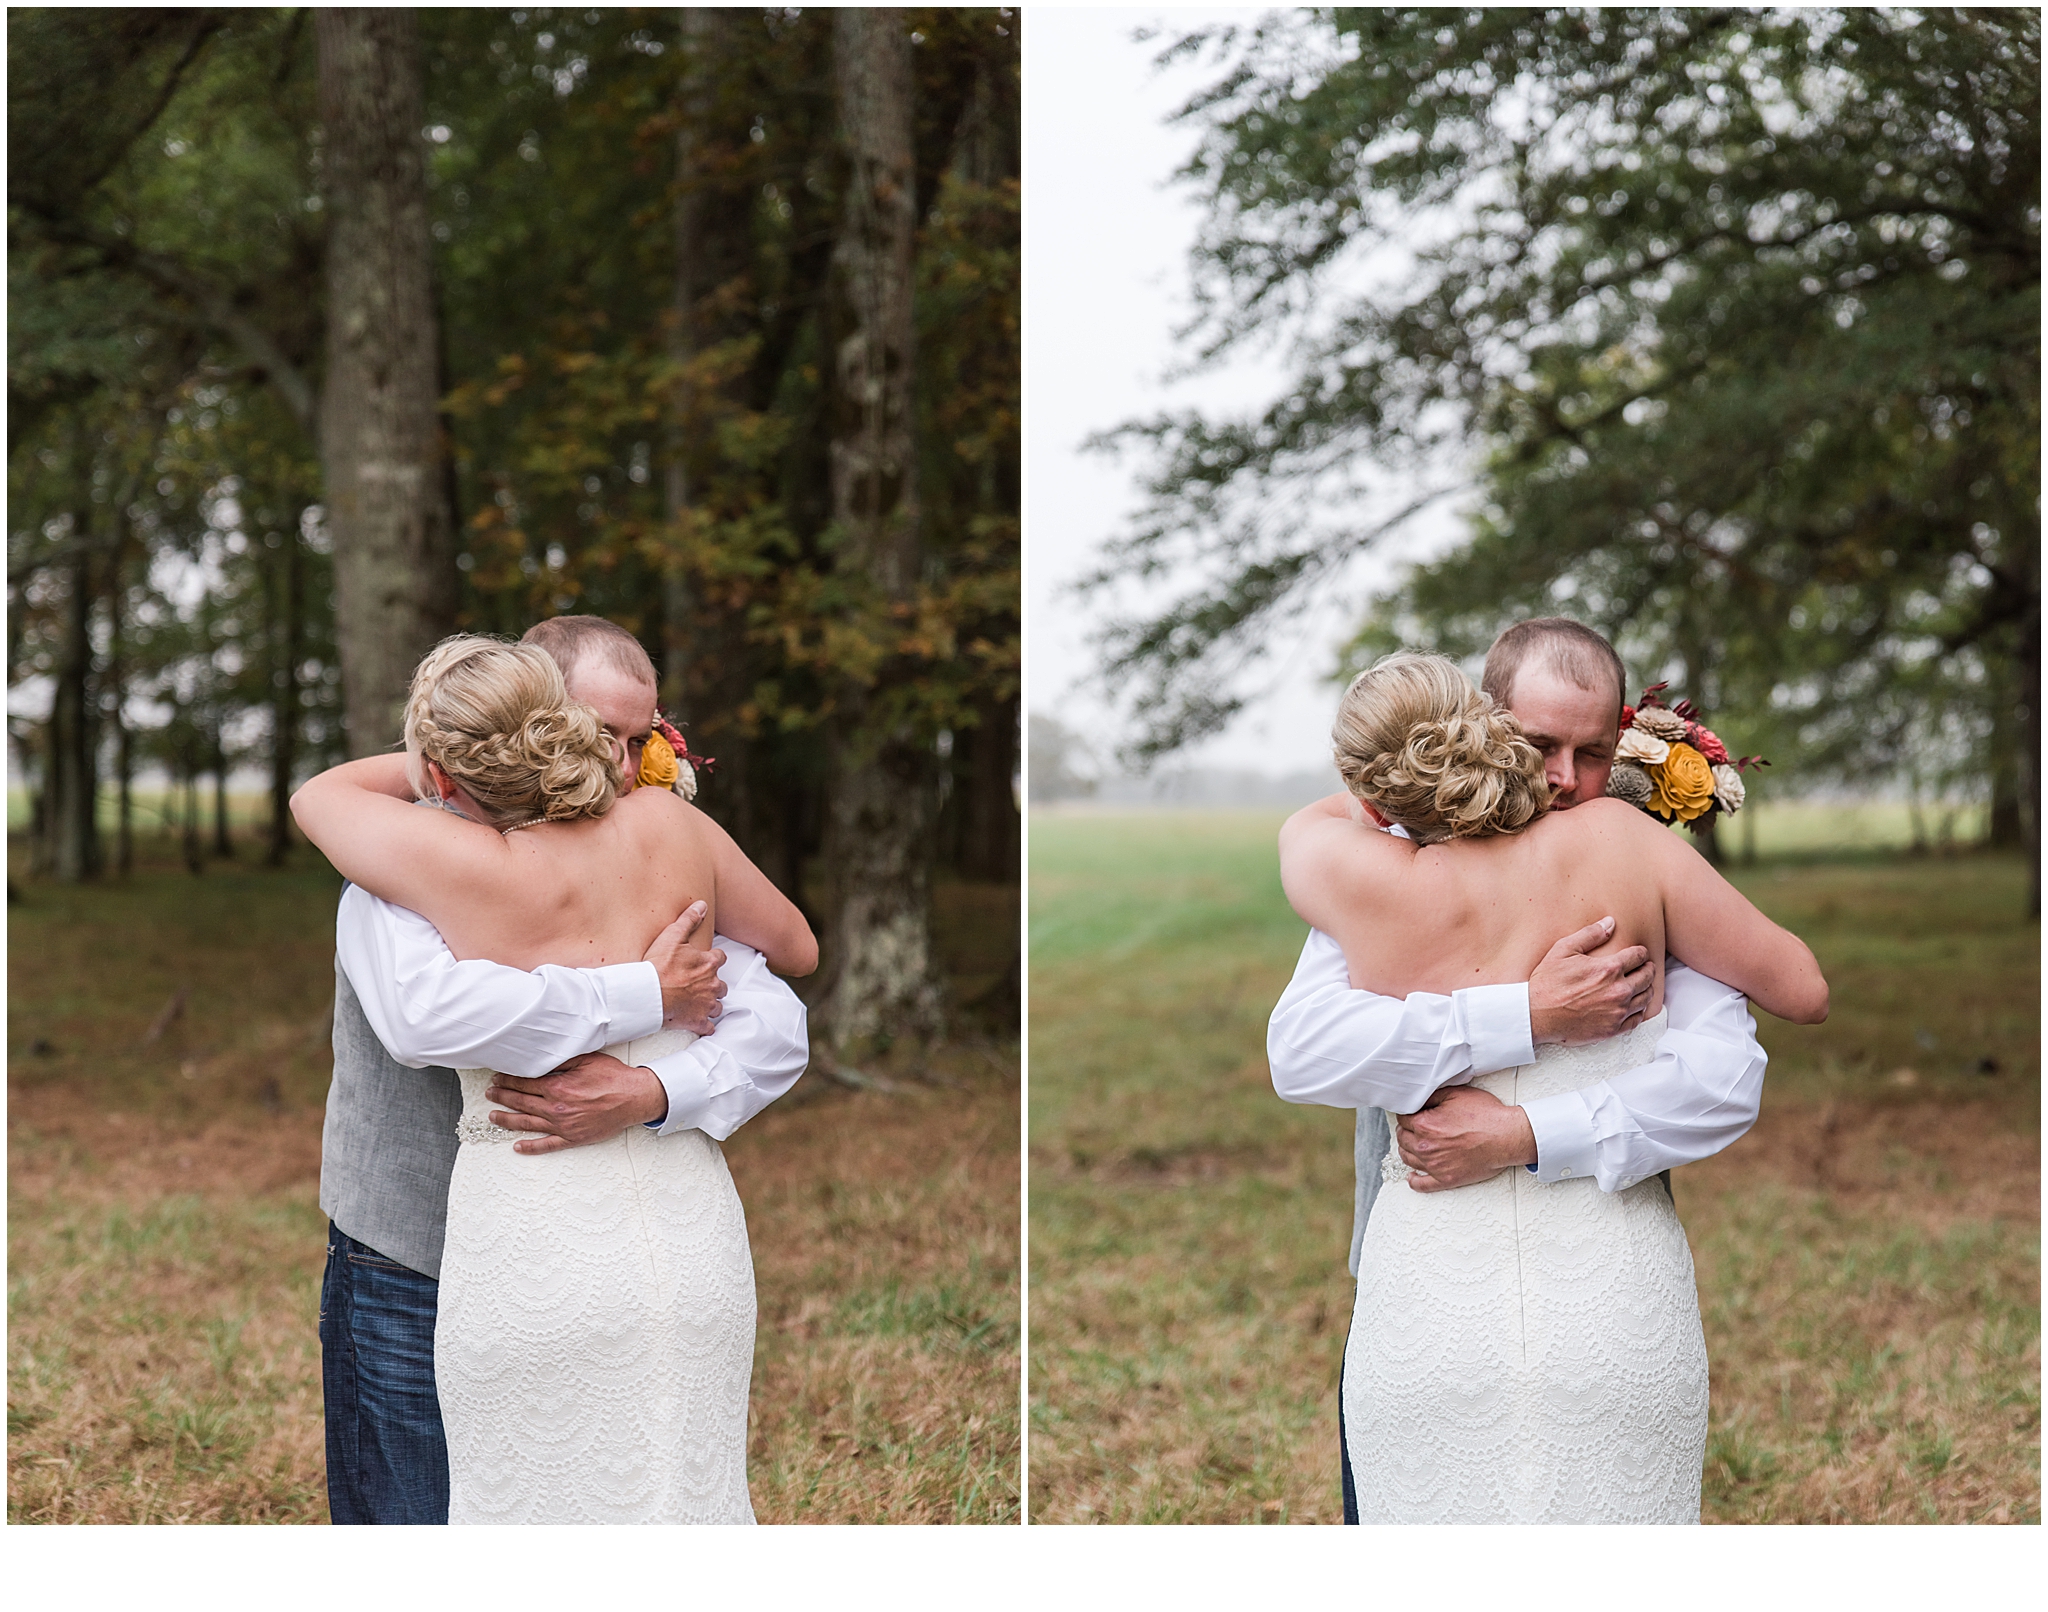 First looks shared during a Tennessee Farm Elopement.